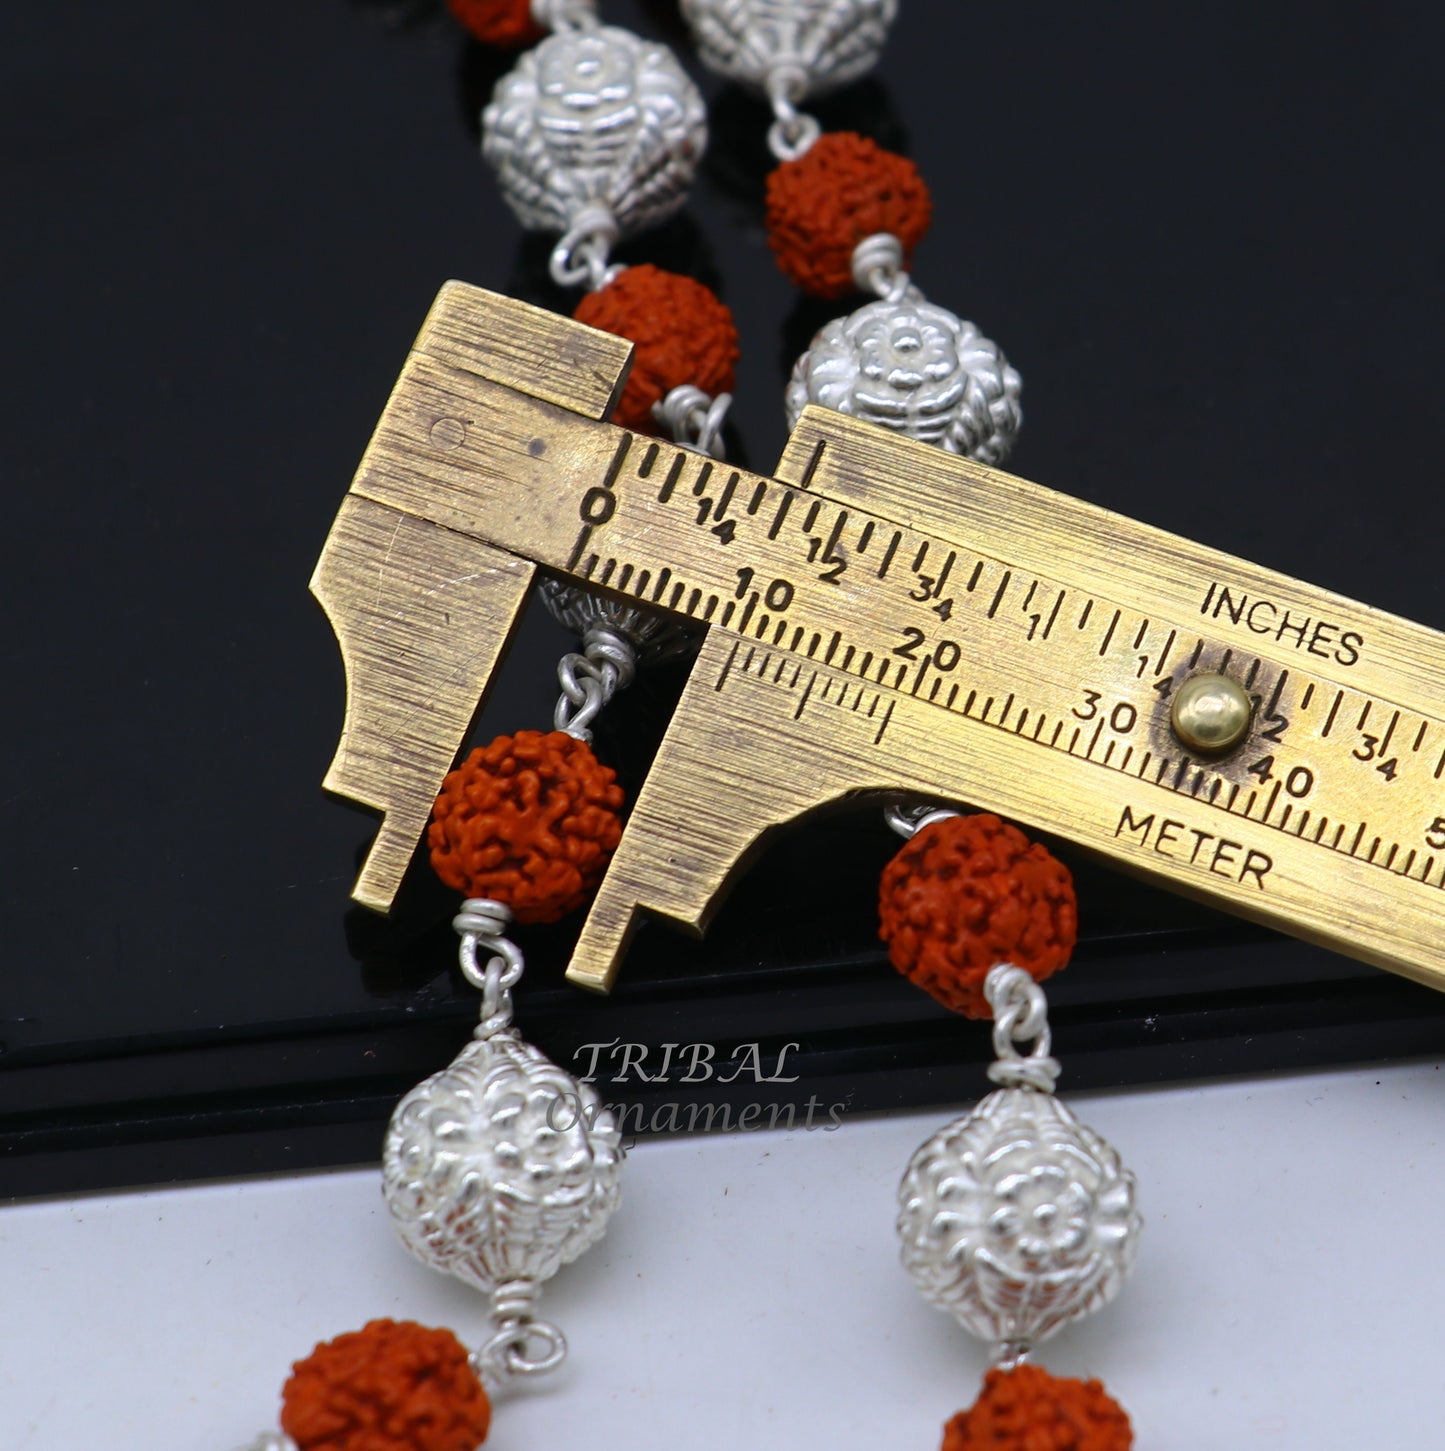 925 Sterling silver gorgeous natural rudraksh beads and handmade silver ball beads mala necklace ethnic jewelry from Rajasthan india ch205 - TRIBAL ORNAMENTS